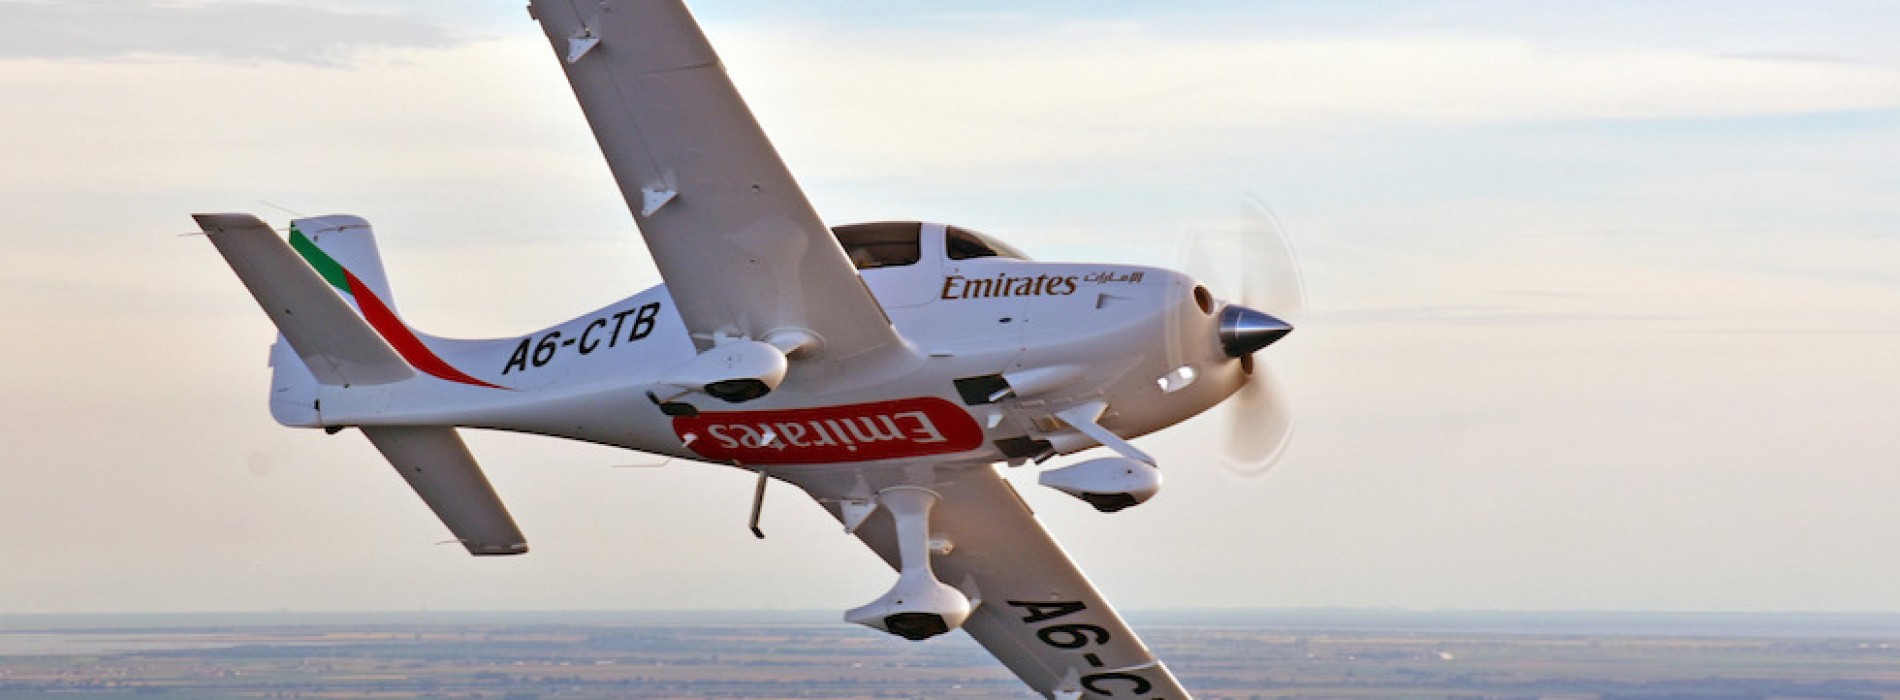 Emirates Flight Training Academy receives delivery of first training aircraft